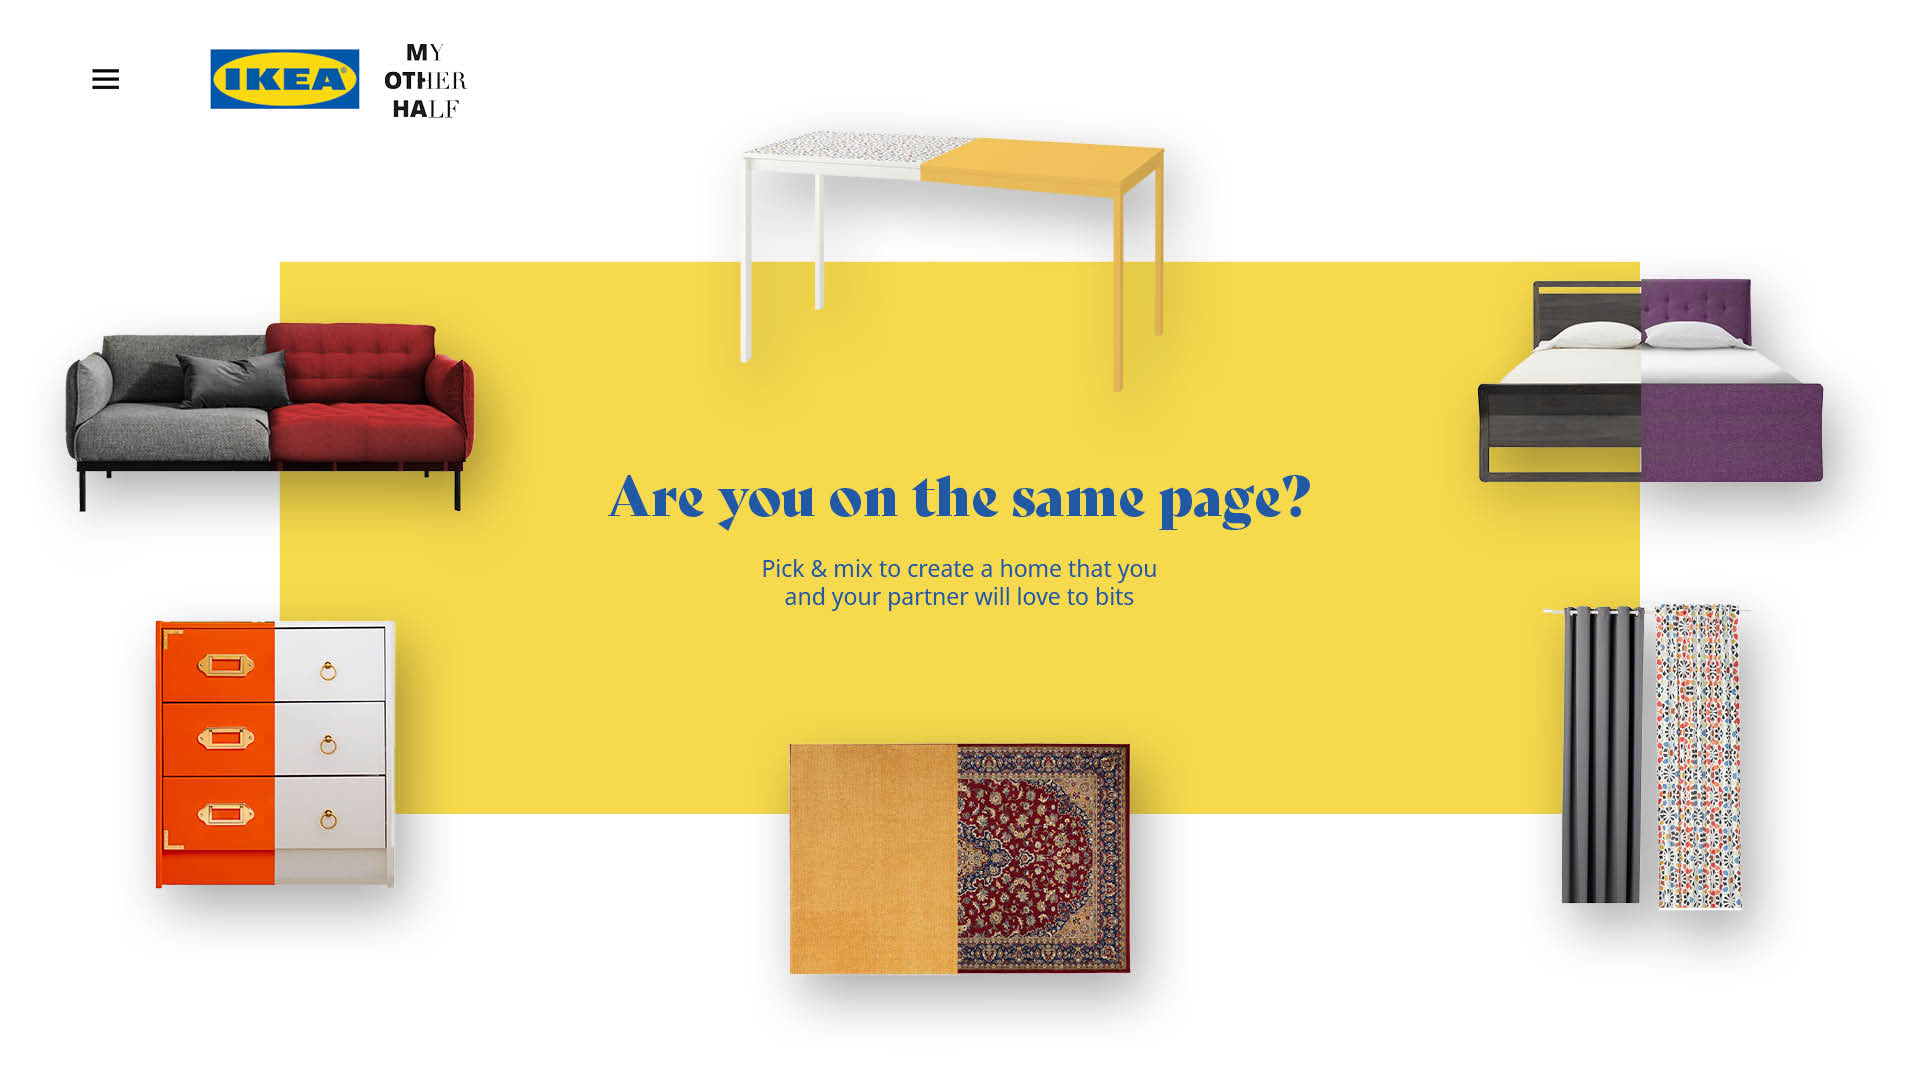 IKEA website that demonstrates customization functionality as a part of My Other Half campaign designed by Tatiana Diakonova (BA Graphic Communication)